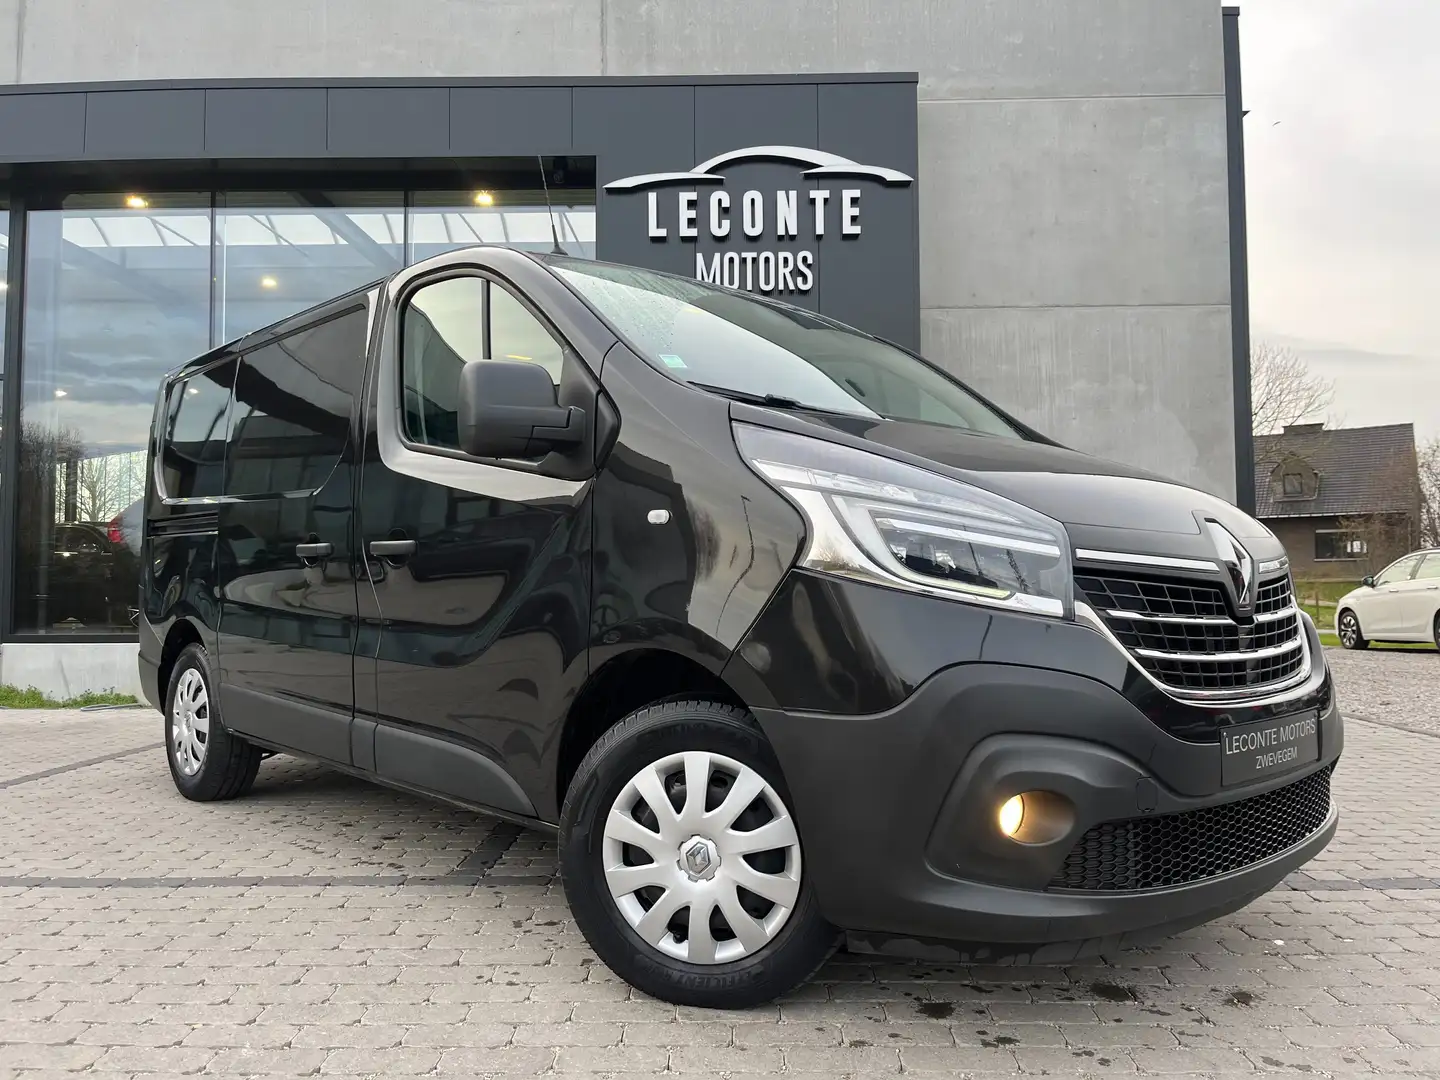 Renault Trafic 2.0DCI Lichte Vracht 3-zit/LED/Gps/Camera/PDC/BLTH Siyah - 1